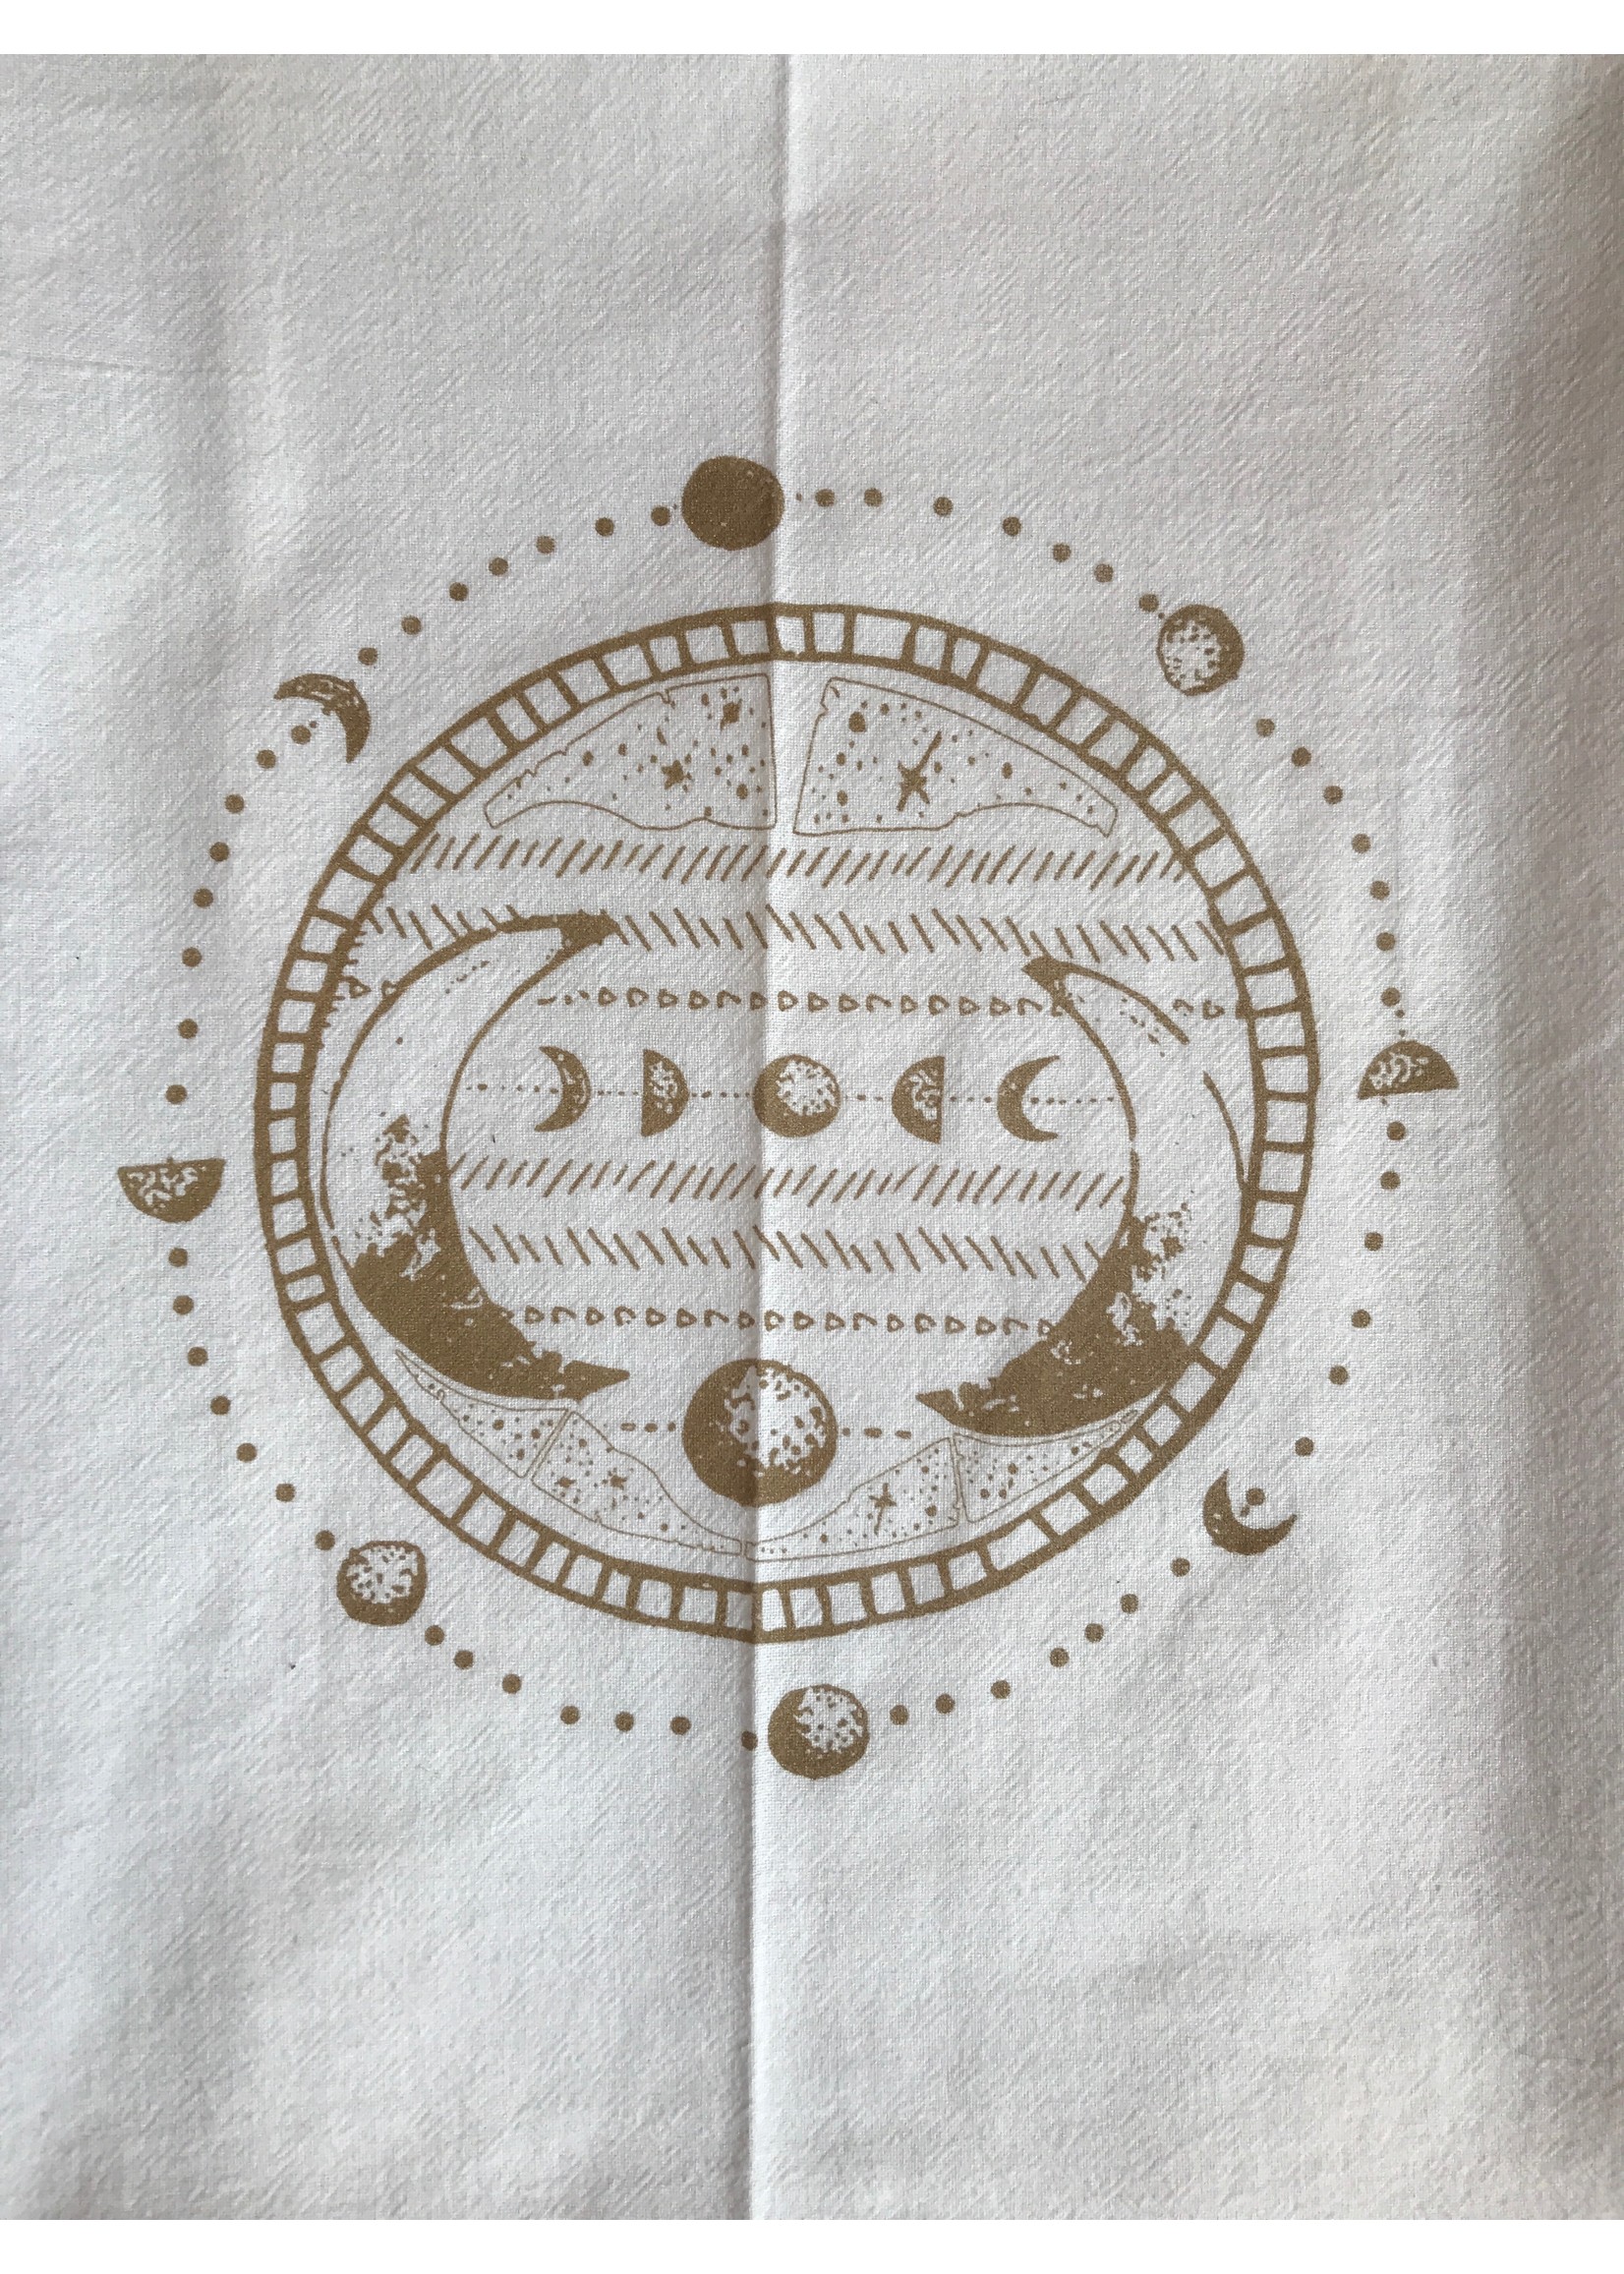 Tangled Up In Hue Wholesale Screen Printed Dish Towel Moon Phase